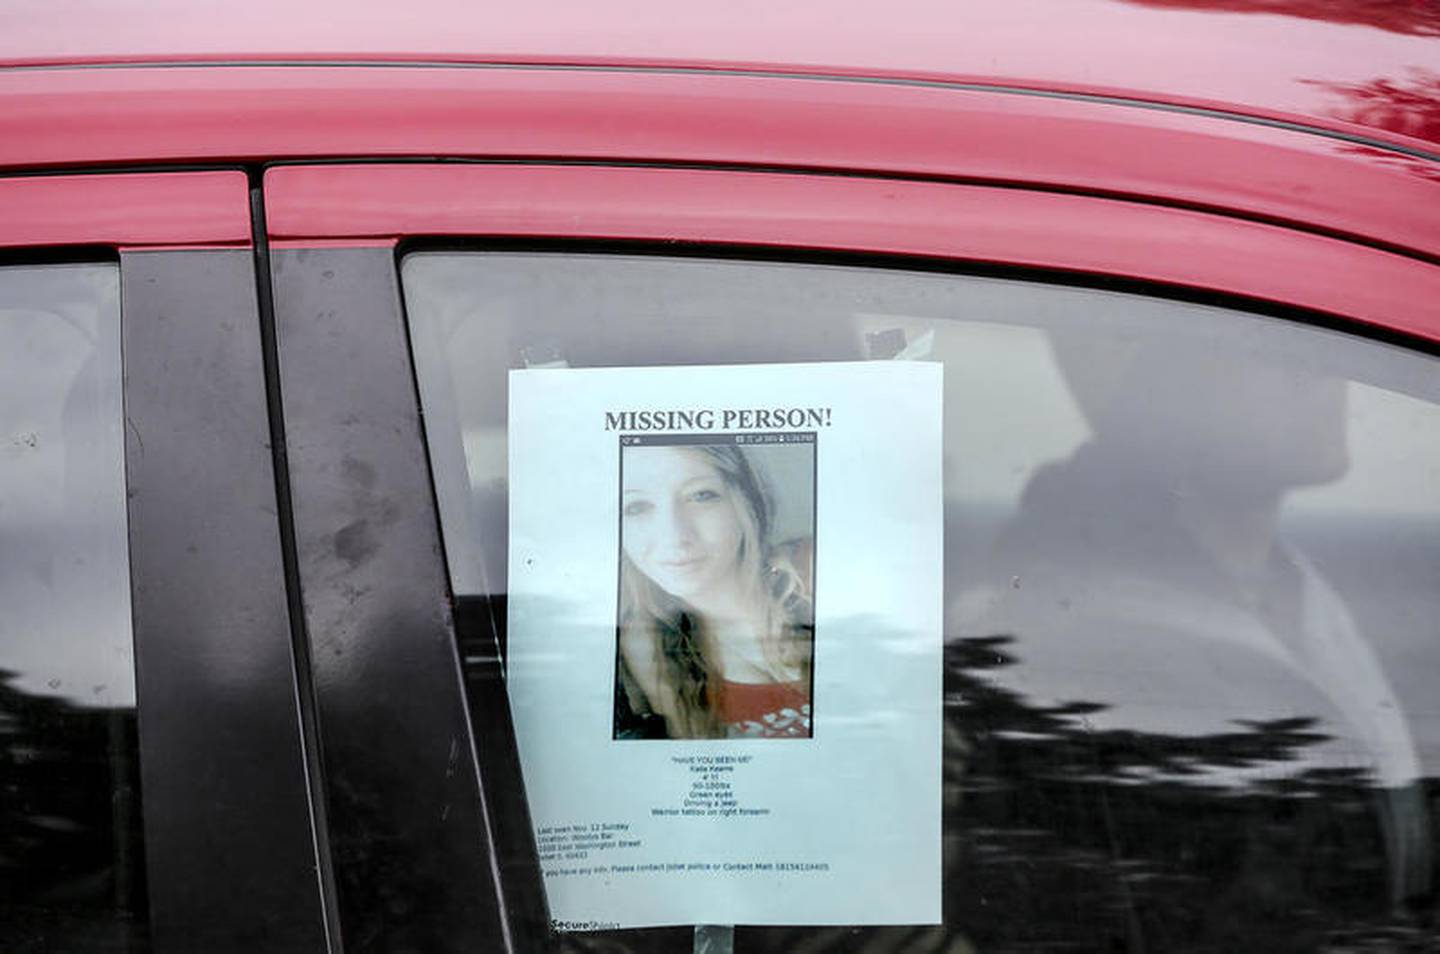 A missing persons flyer hangs in the window of Marie Roche's window Thursday, Nov. 16, 2017, after Kaitlyn Kearns, a 24-year-old bartender from Joliet, was found dead from a gunshot in a rural area of Kankakee County, according to a sheriff’s office news release.